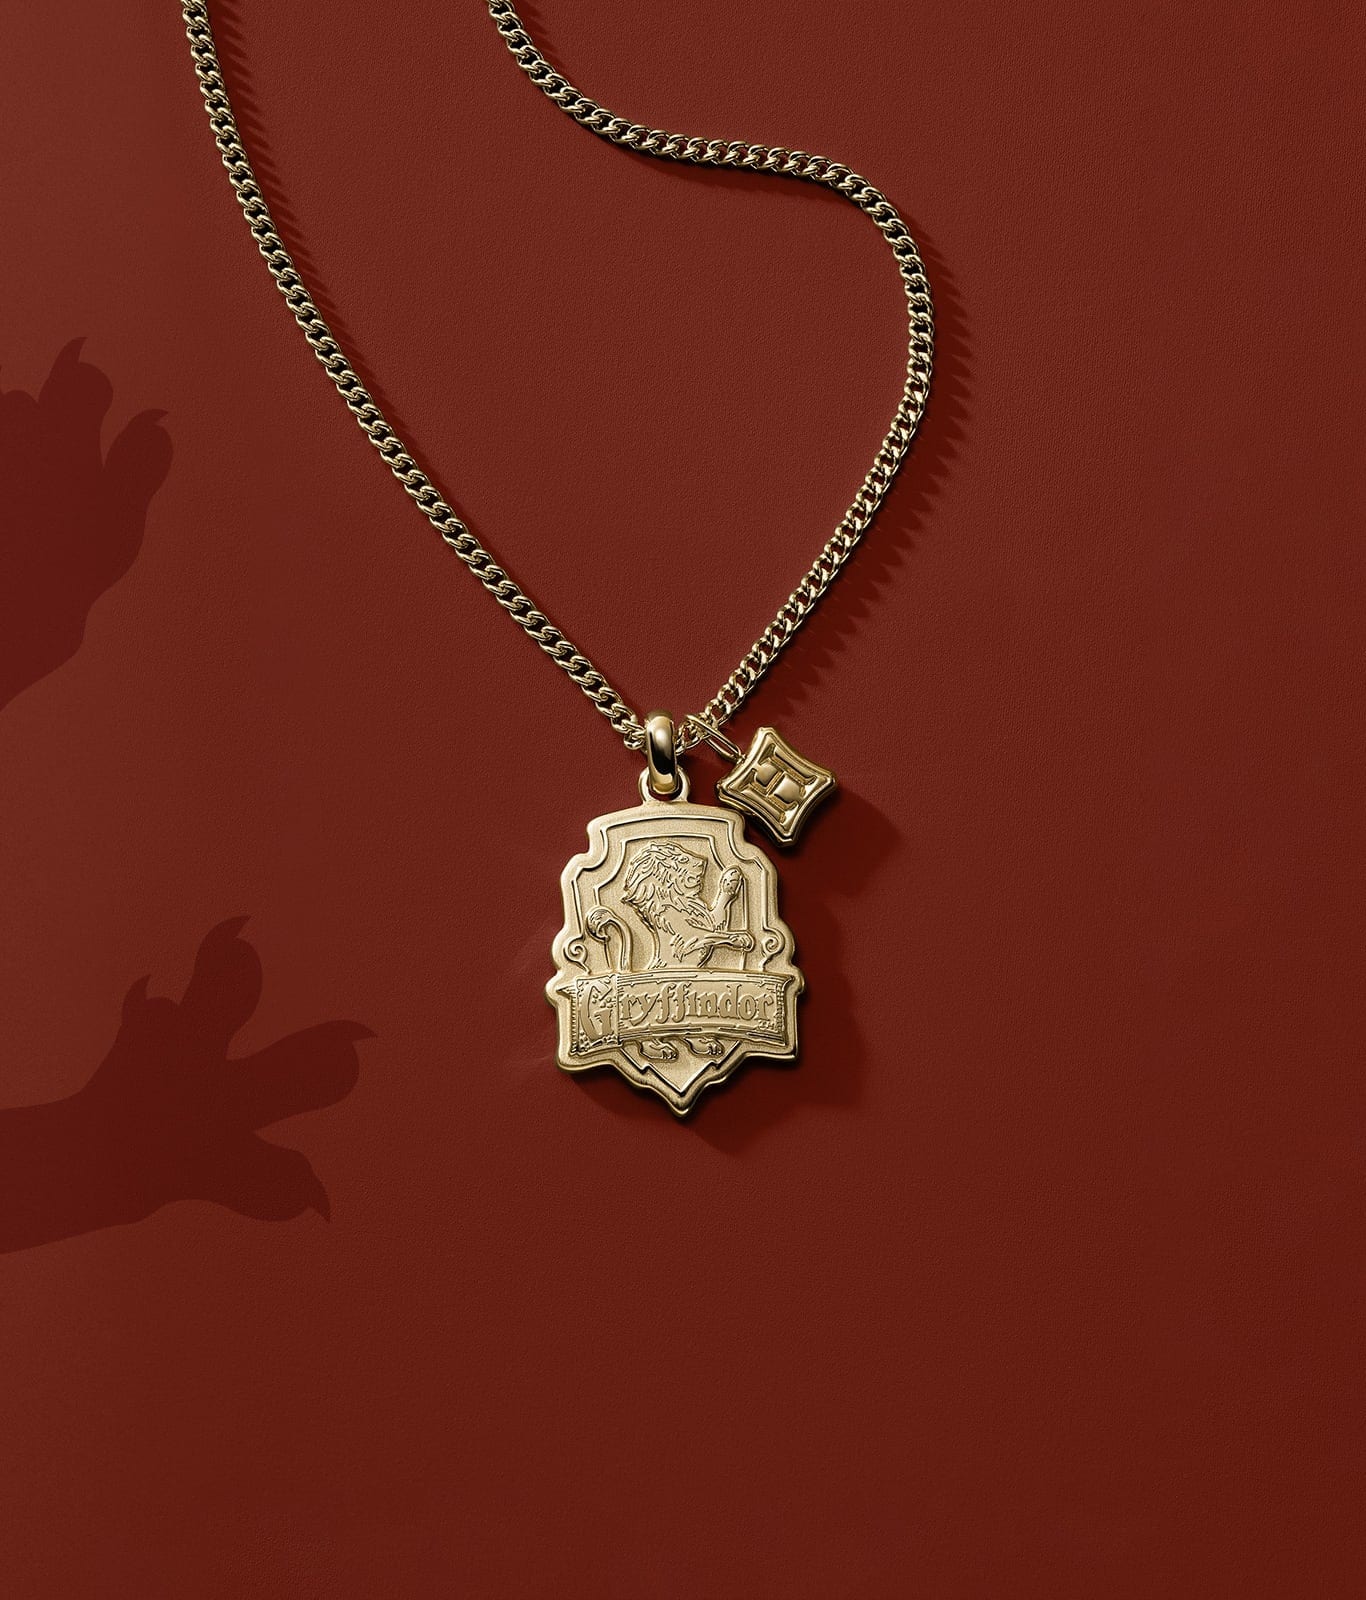 A gold-tone Gryffindor house pendant.